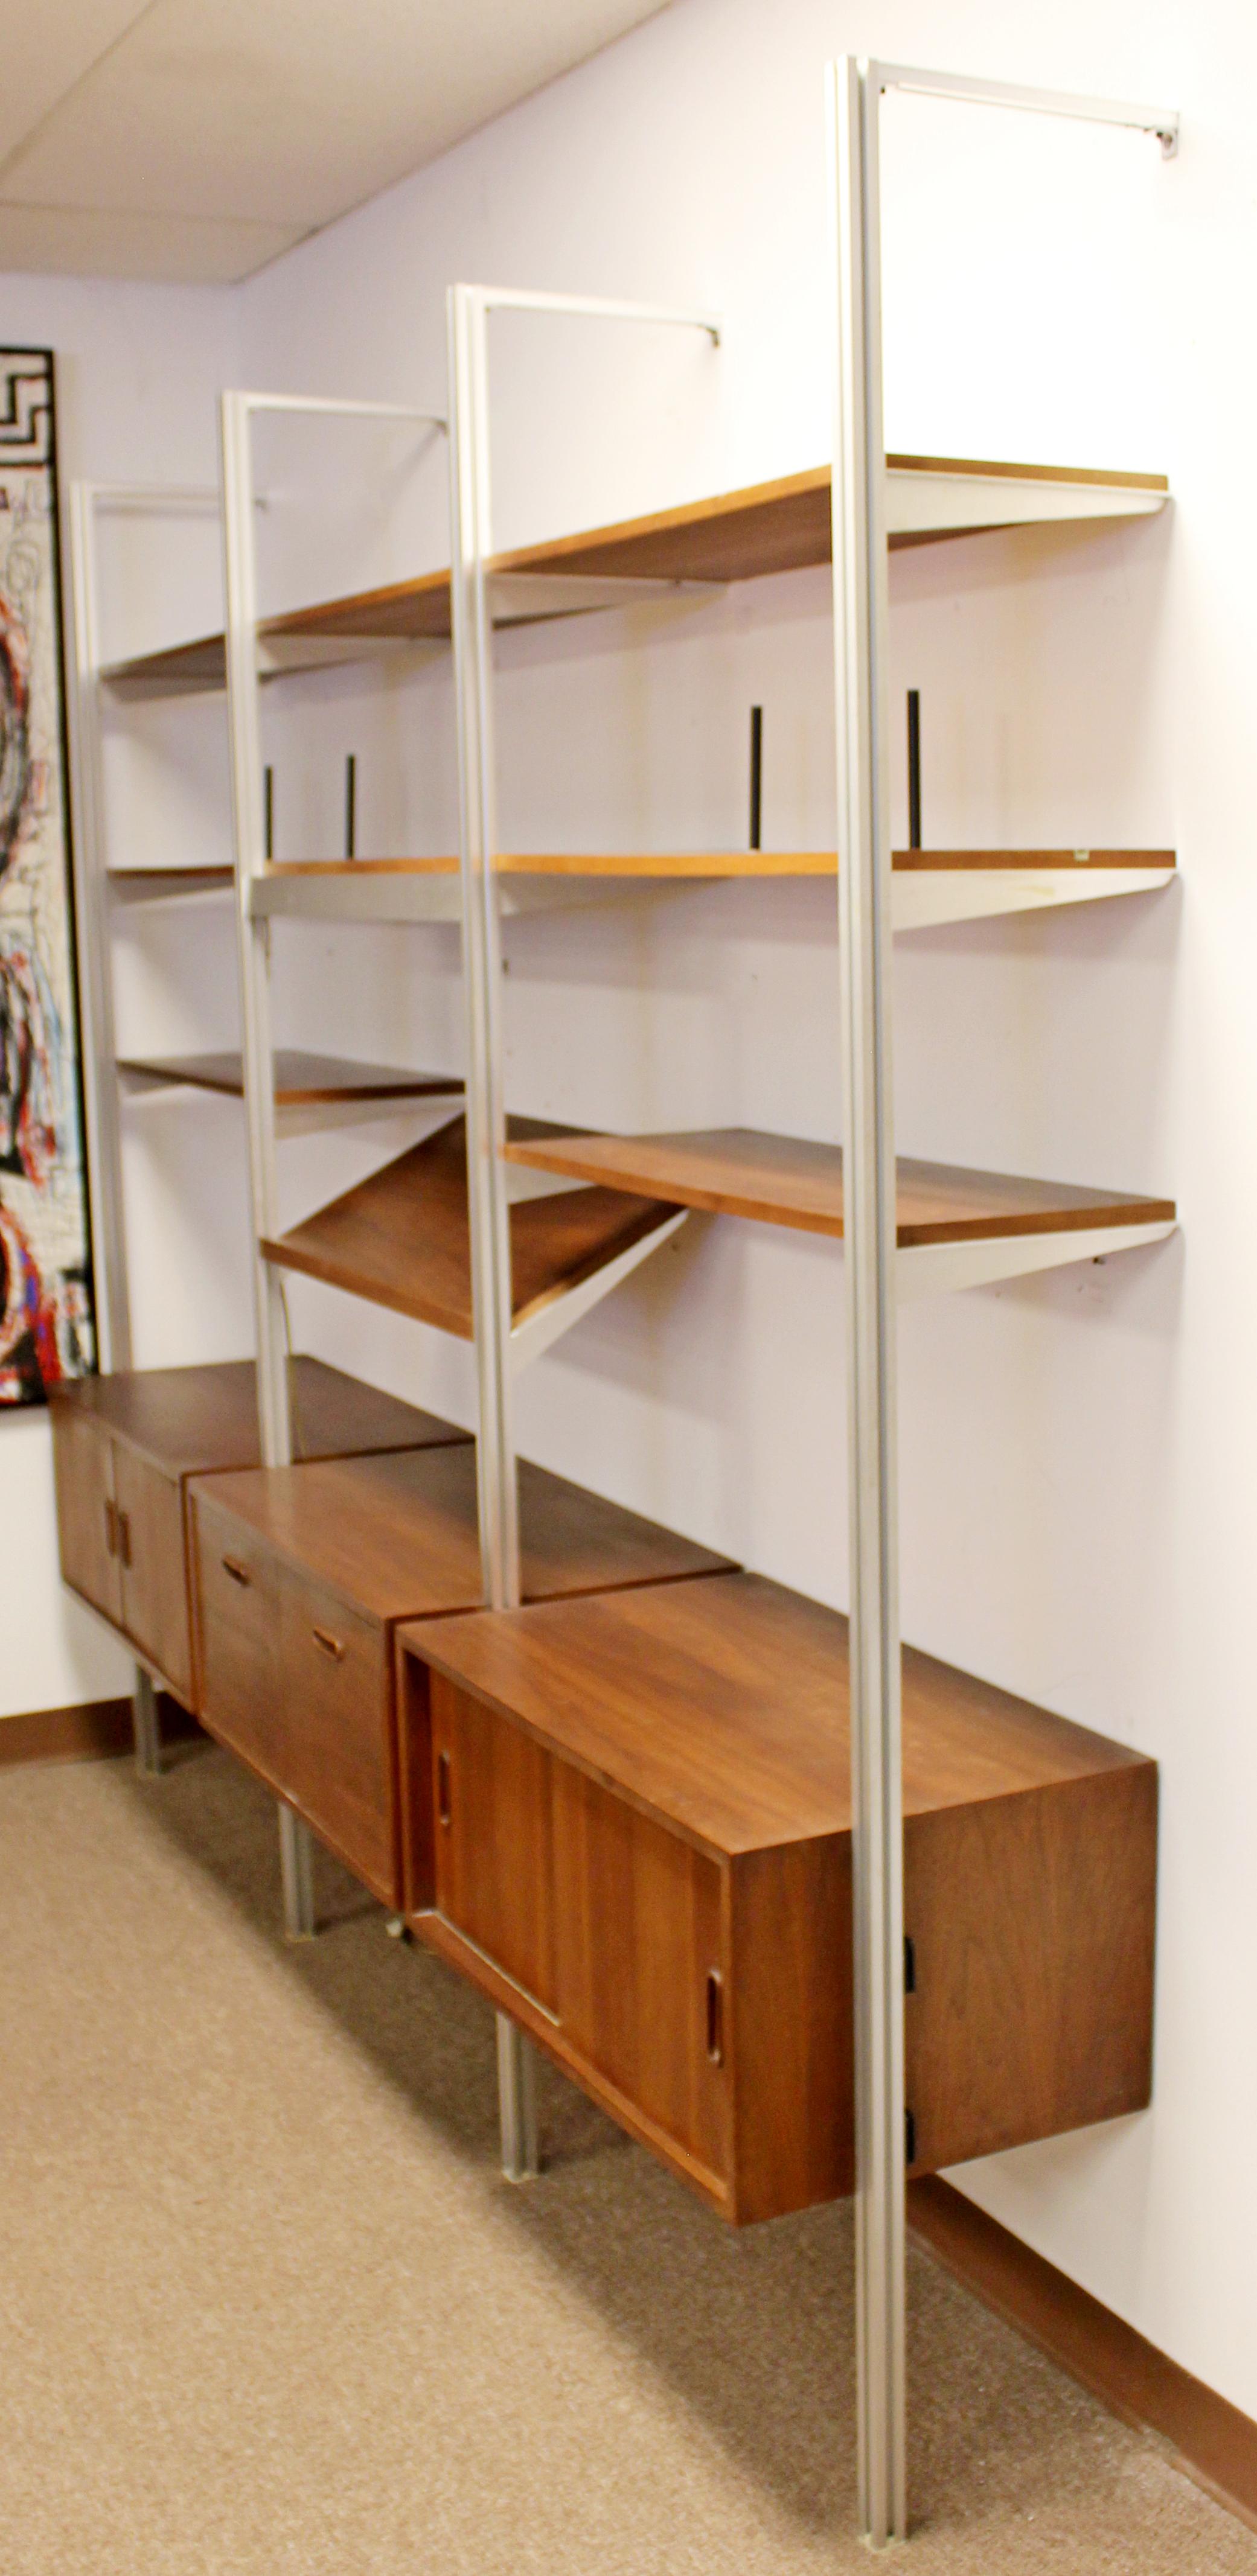 American Mid-Century Modern George Nelson 3 Bay Wall Unit Shelves Cabinets